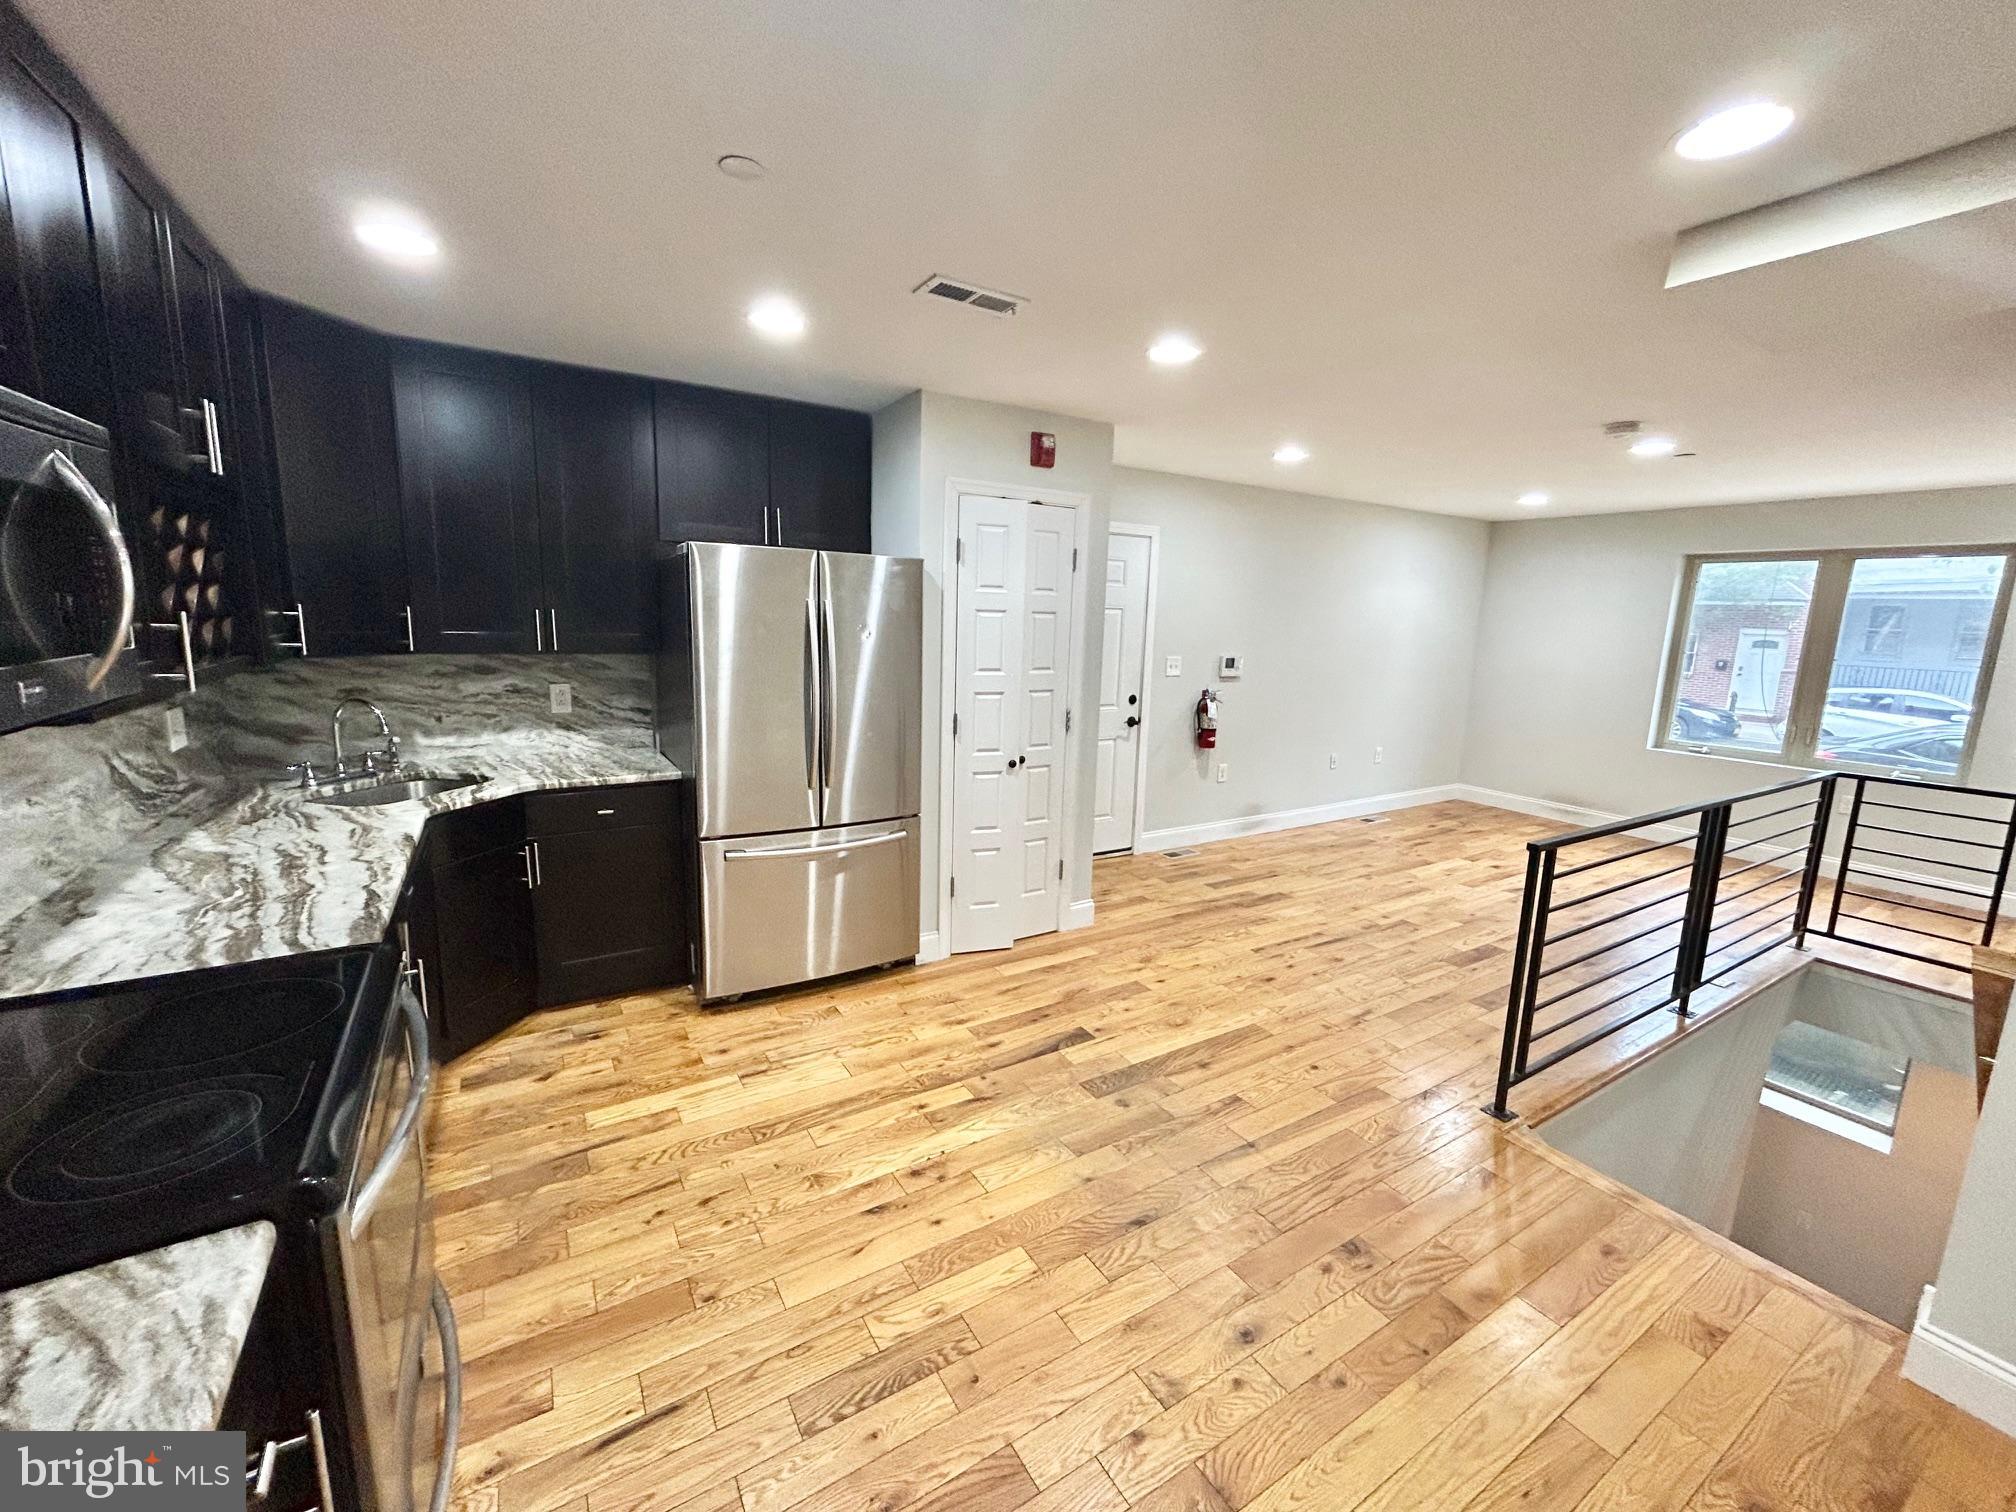 a large kitchen with stainless steel appliances kitchen island granite countertop a refrigerator and a sink